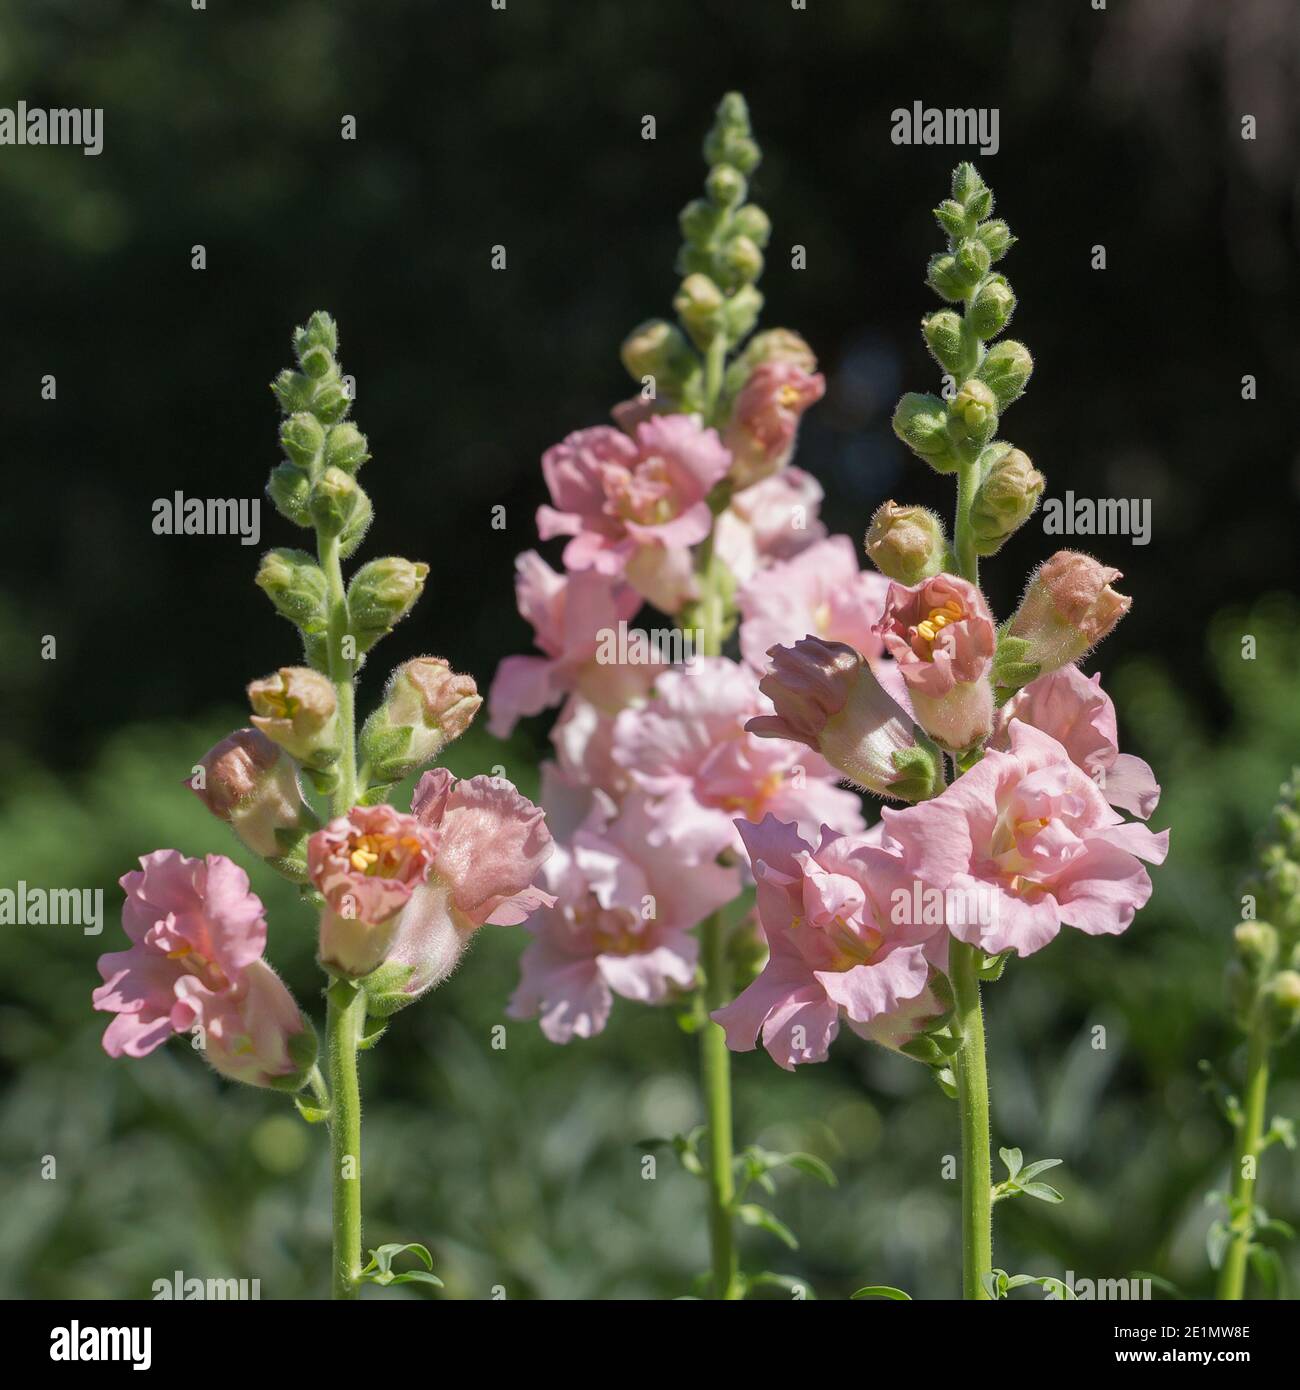 Snapdragon flowers in the city garden. Stock Photo